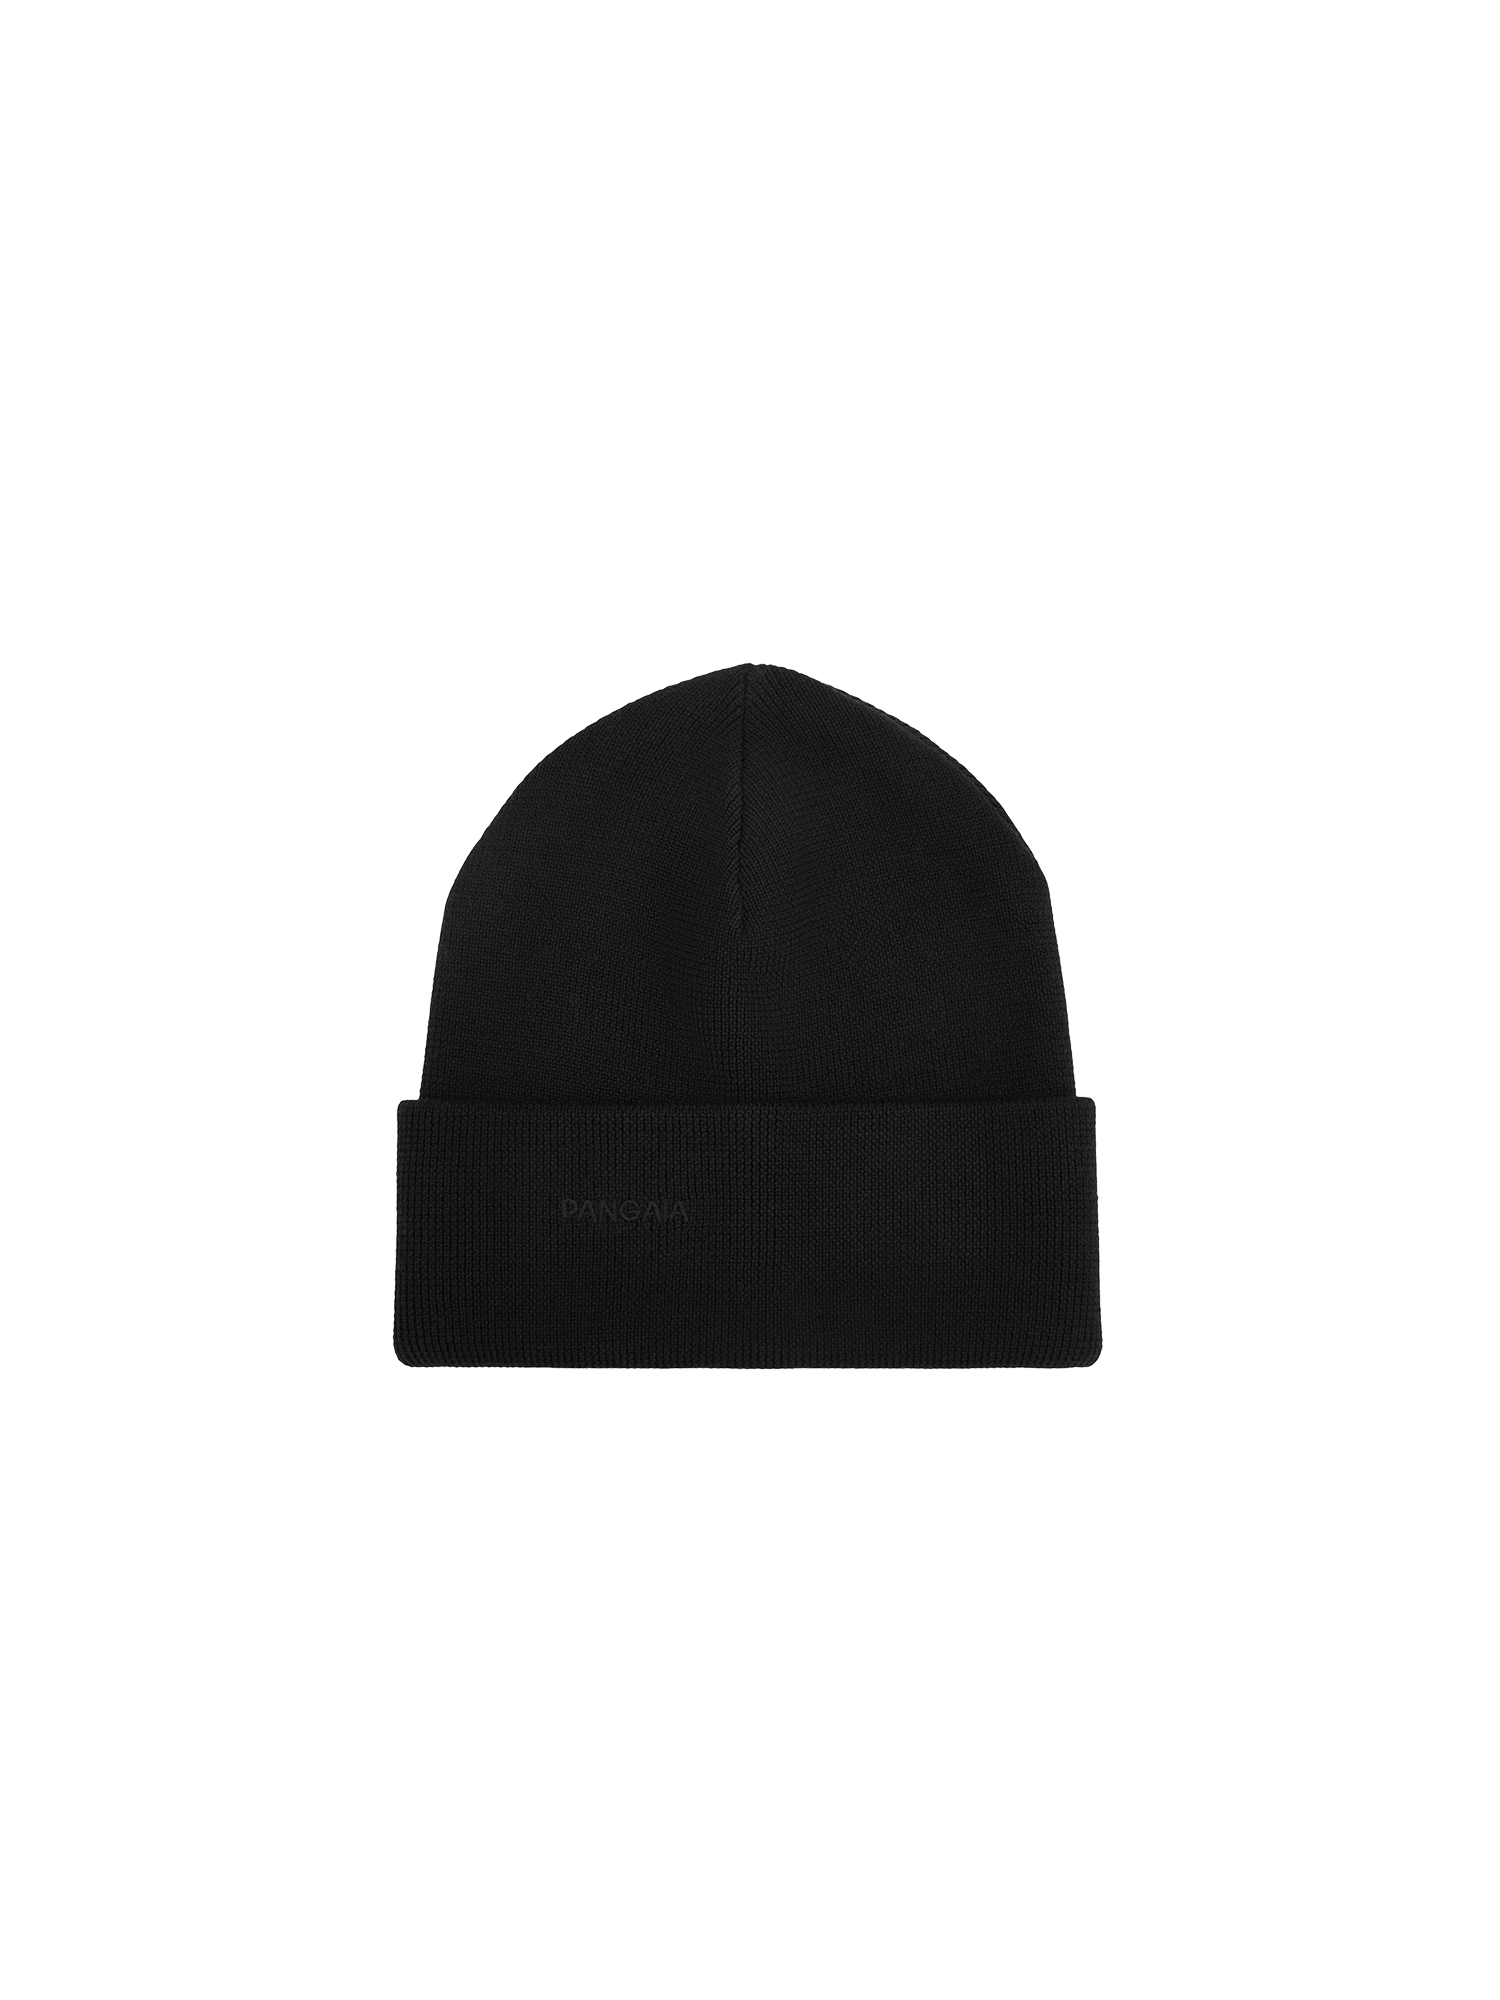 Catya Black Wool Knit Hat With Double White & Black Pom-Poms